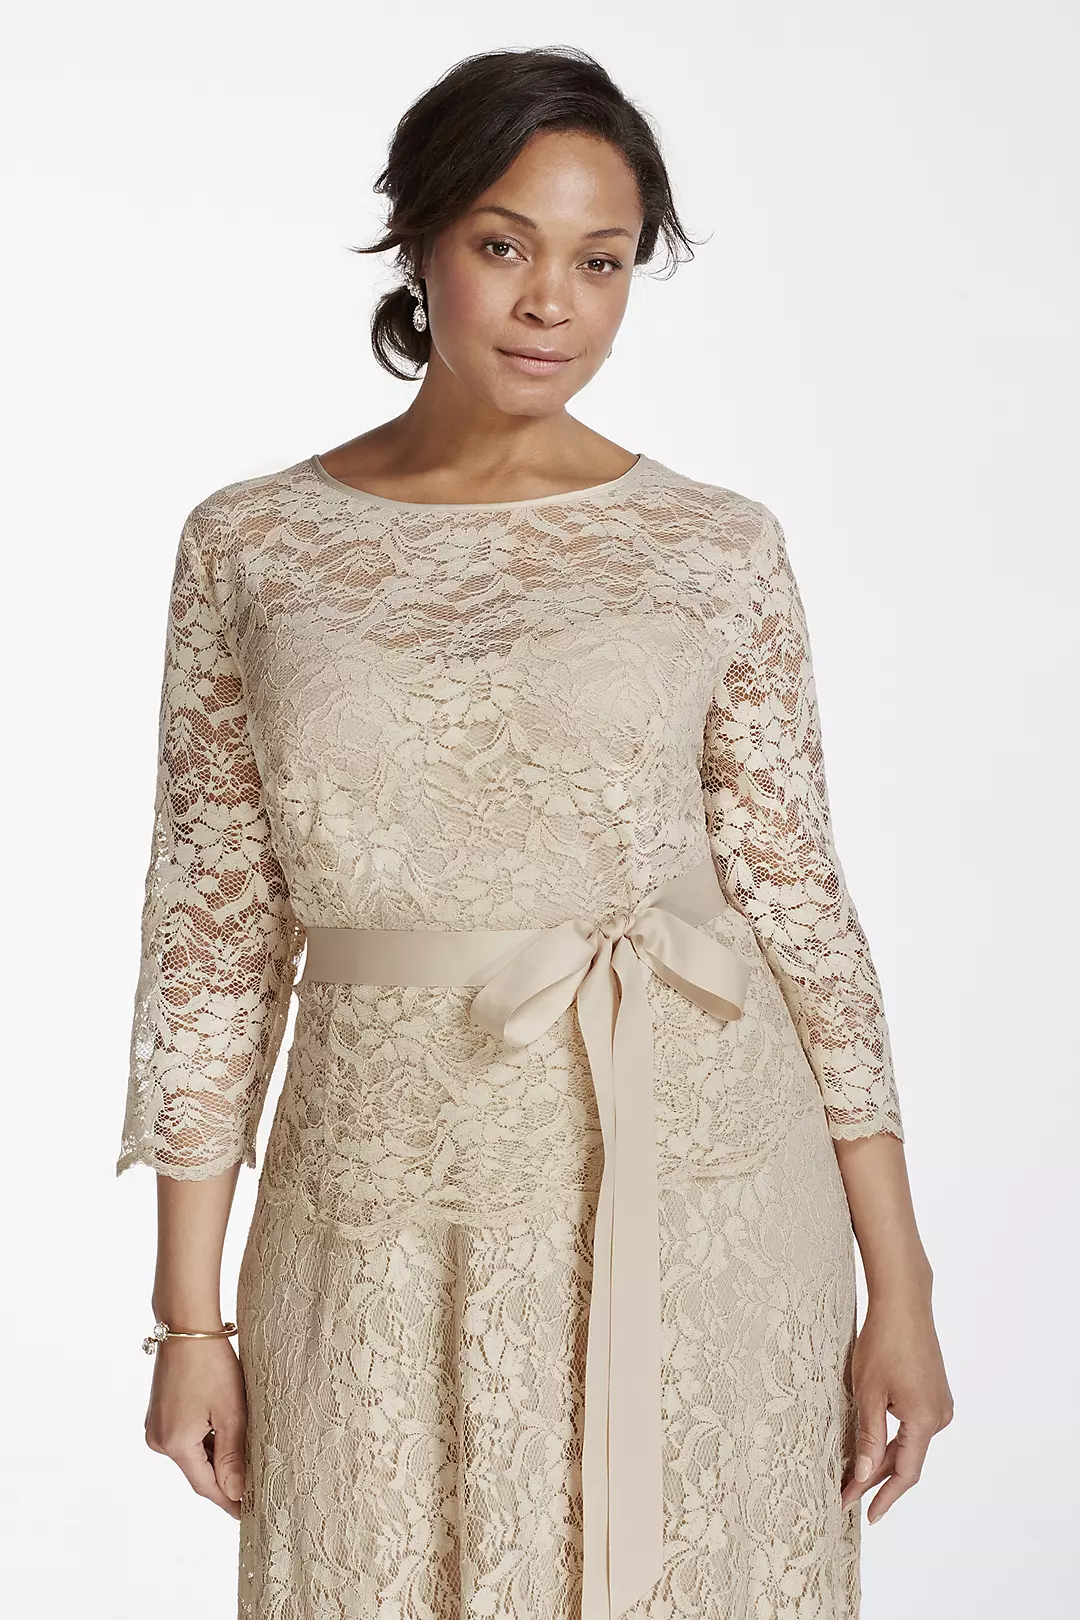 Long Lace Mock Two Piece Dress with Sash Image 3